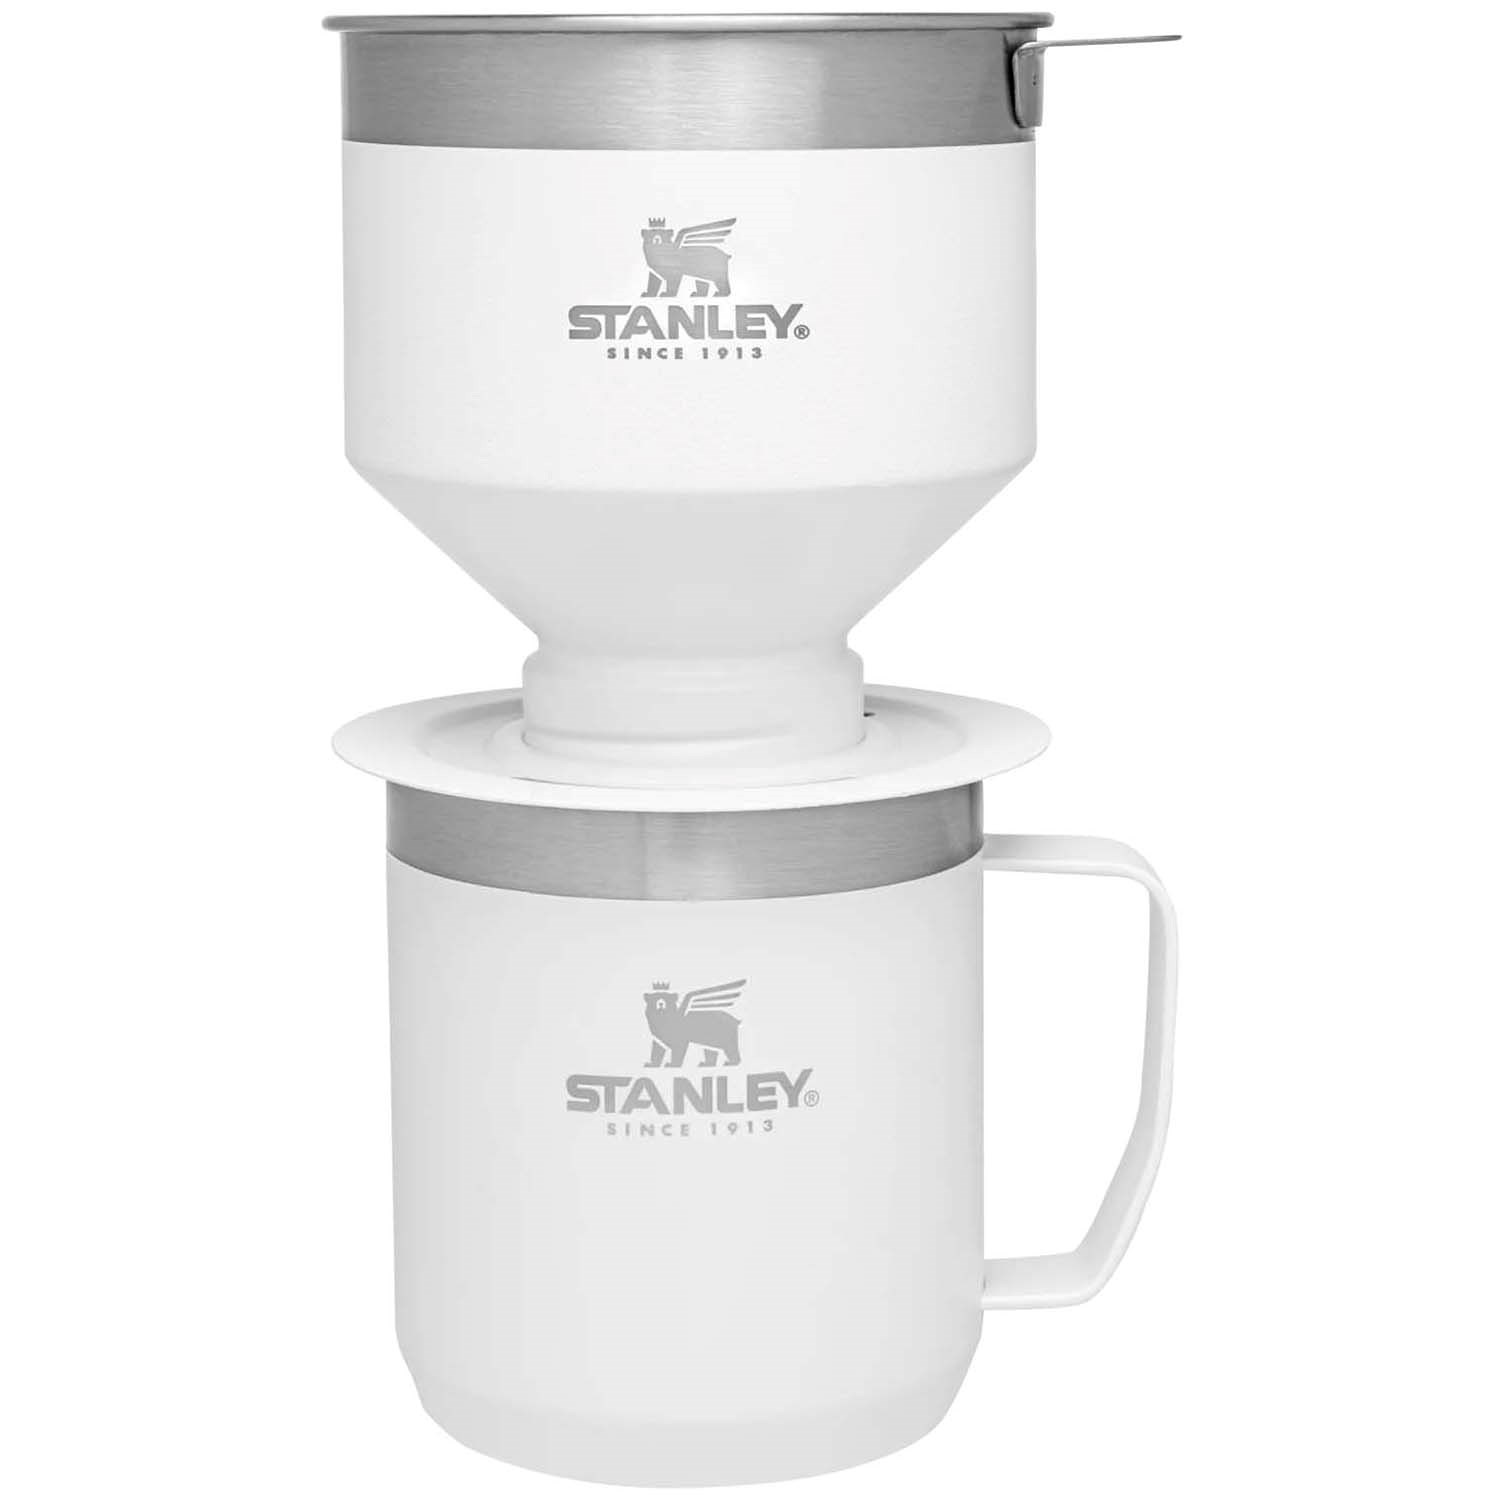 https://images.evo.com/imgp/zoom/233777/962031/stanley-the-camp-pour-over-set-.jpg